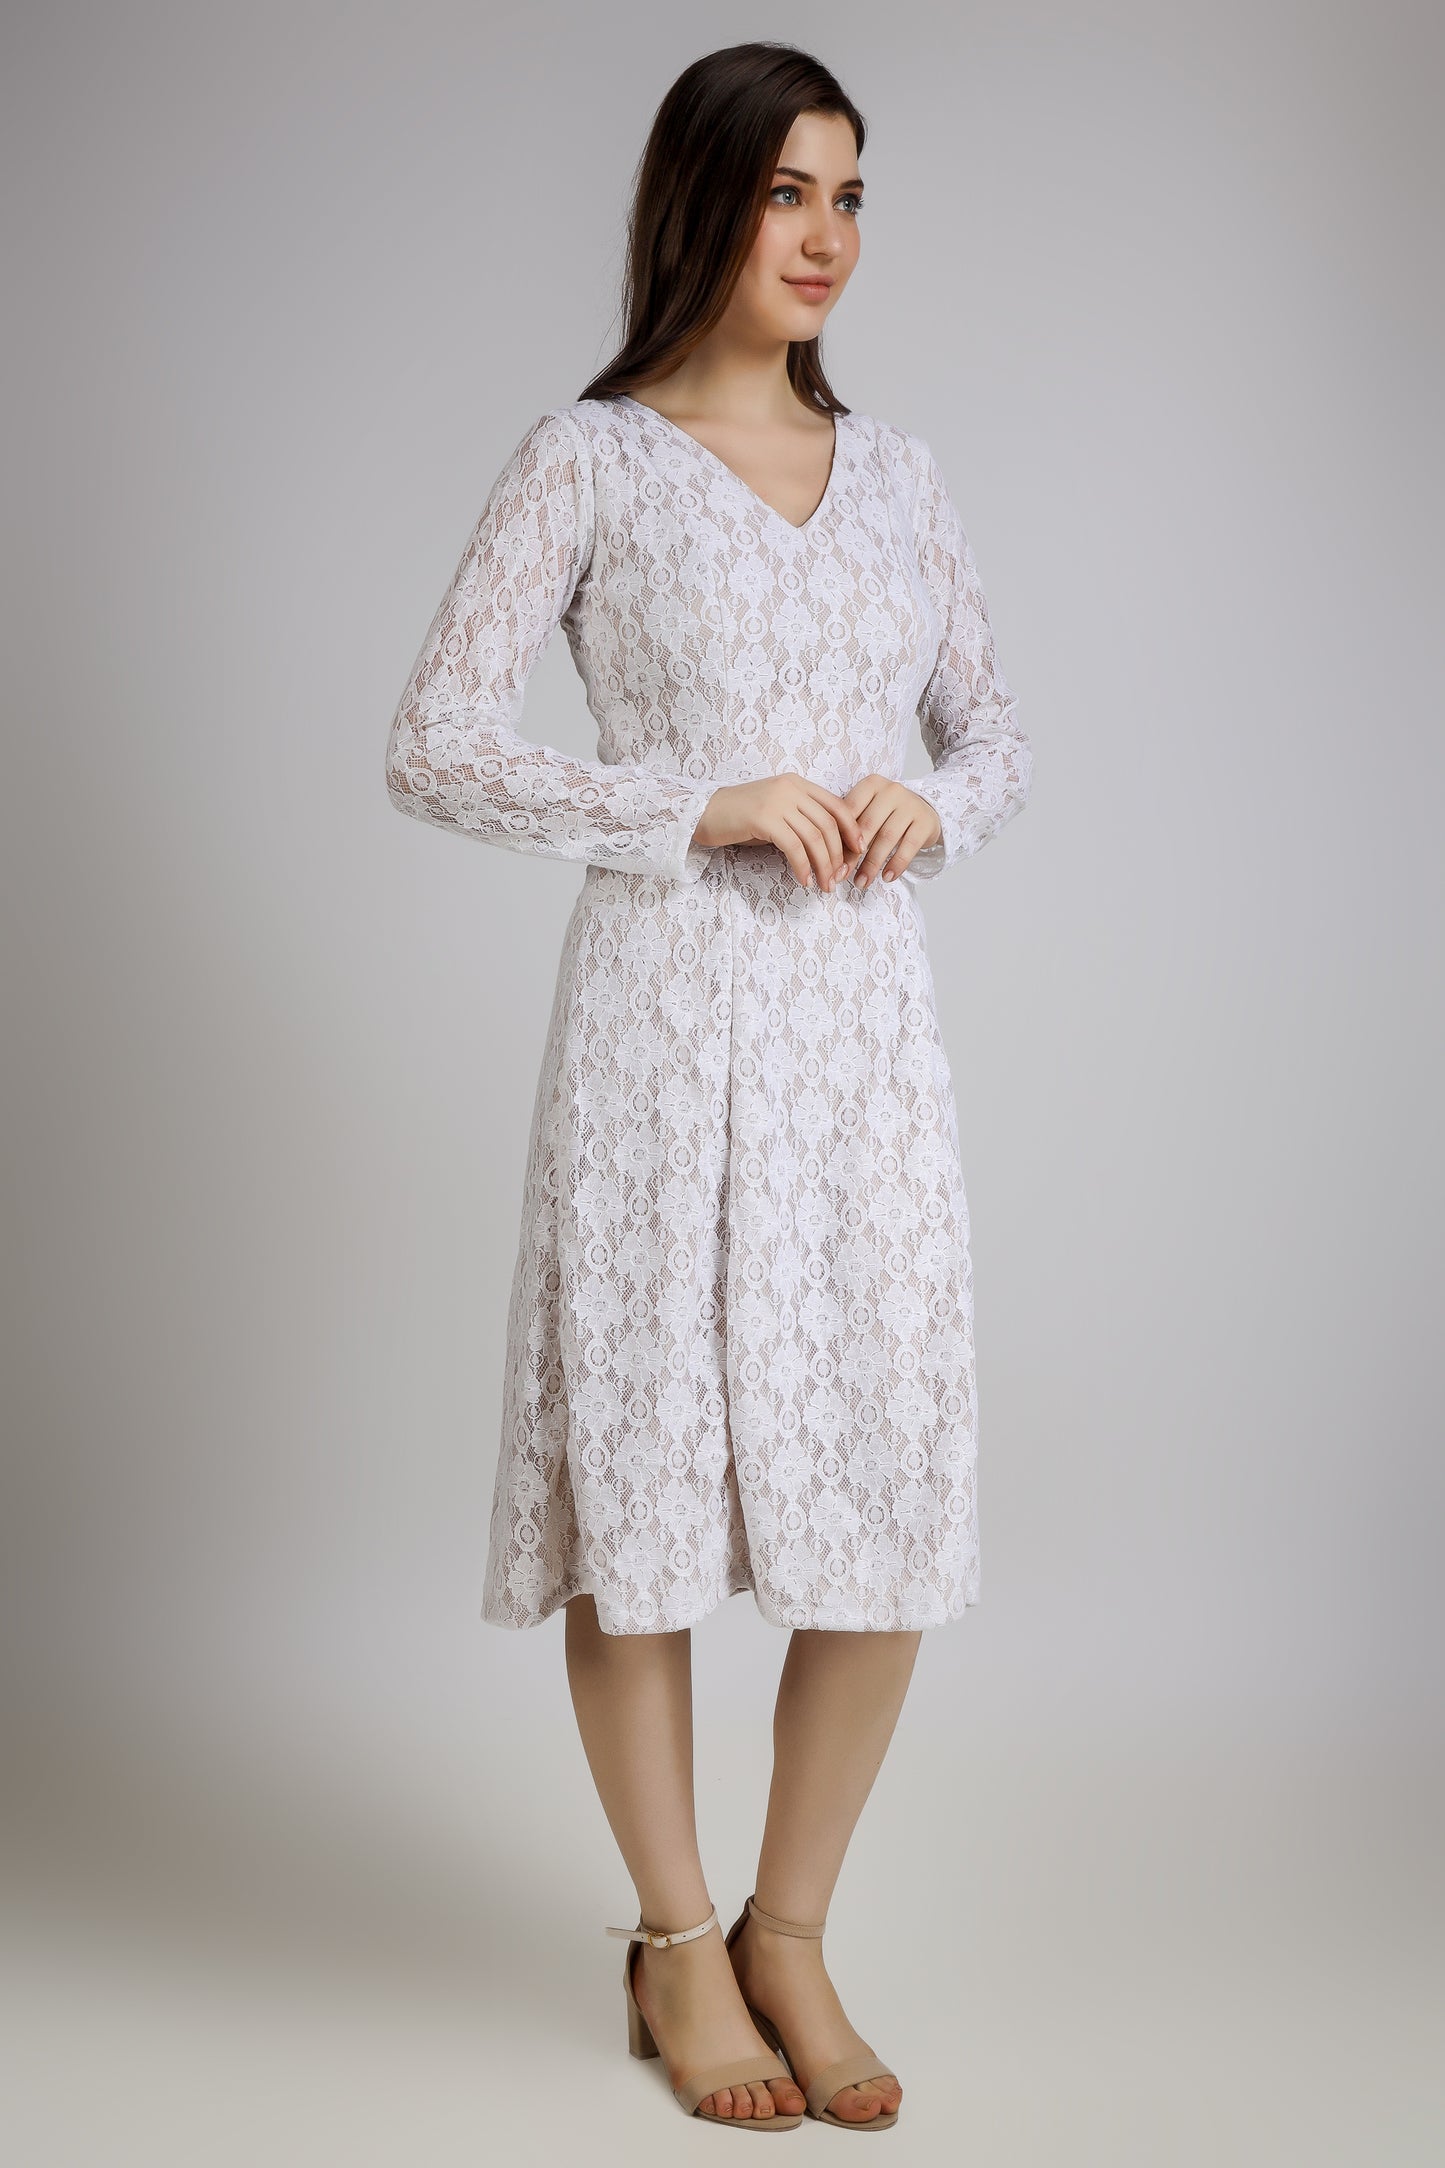 Vomendi White Lace Work Bodycon Dress with Princess Seam and Full  Sleeves